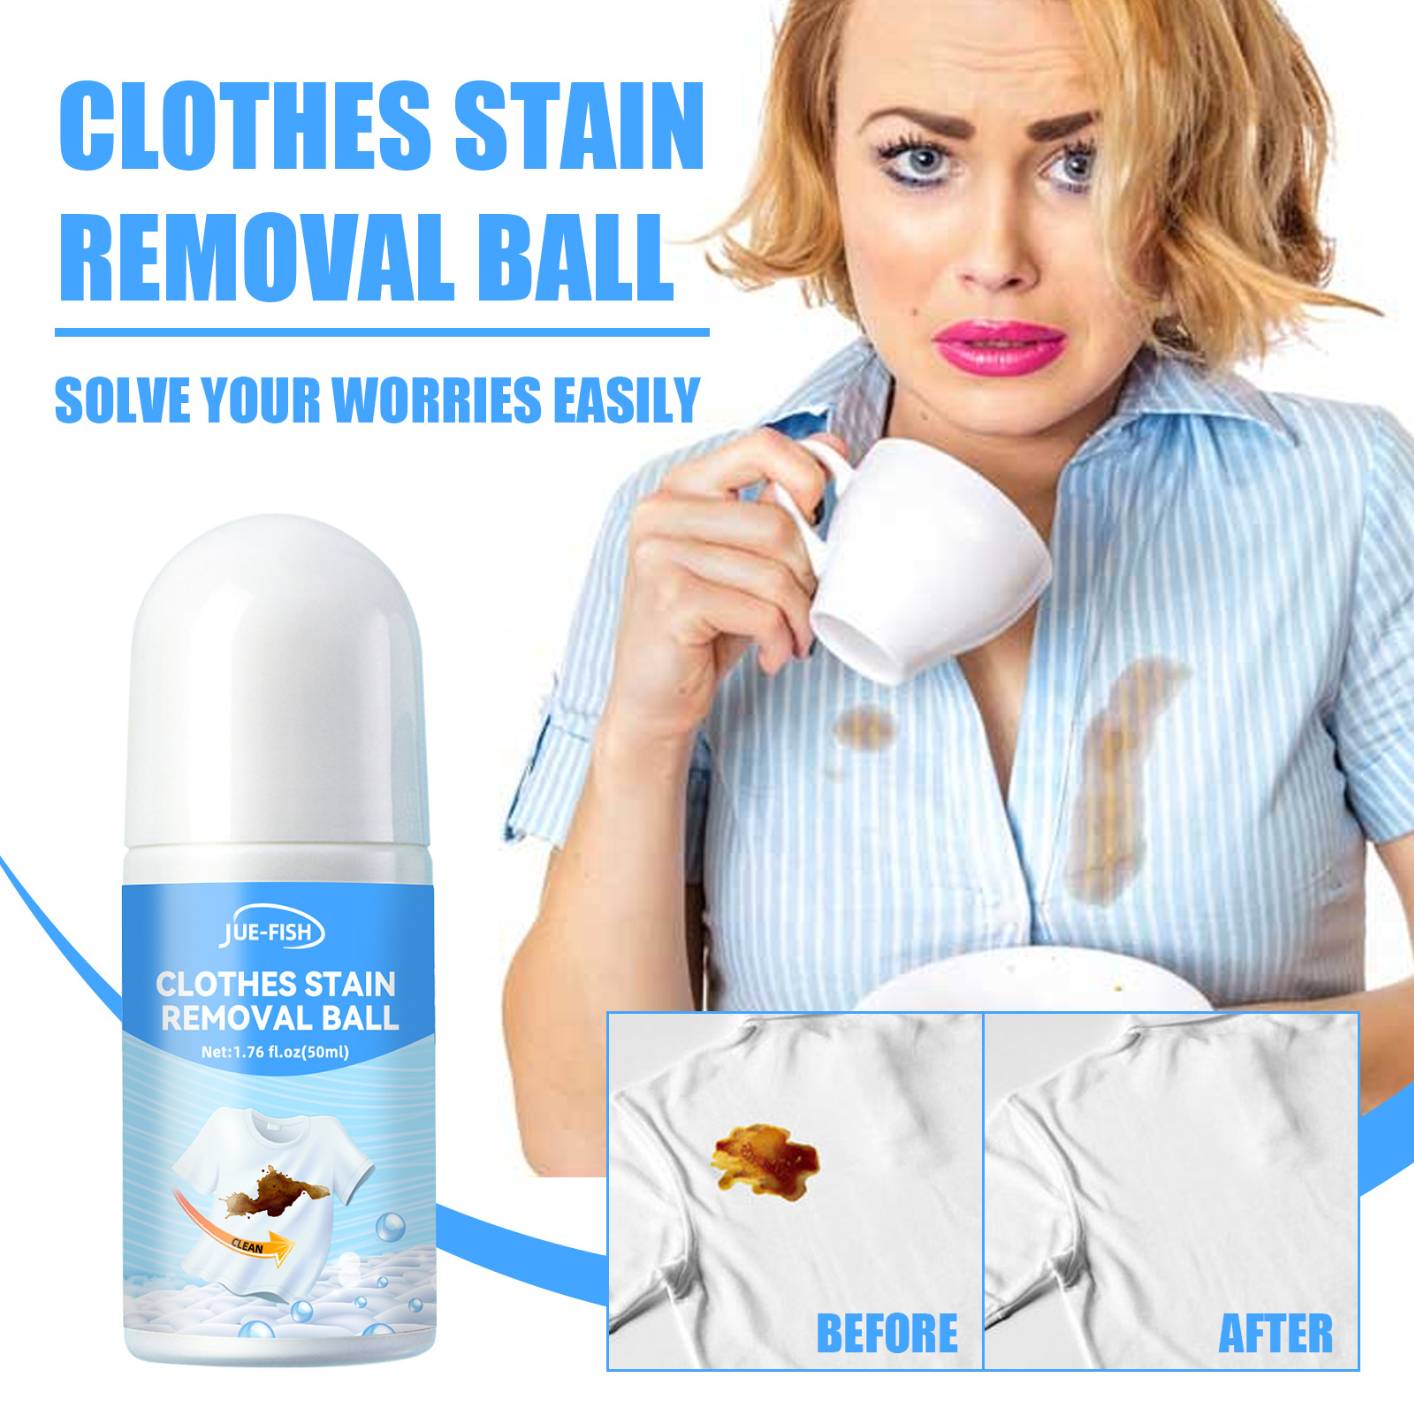 Stain Remover for Clothes - Roll Bead Design, Portable No-wash Instant Stain Remover Pen,Stain Remover Roller-Ball Cleaner for Clothes,Ideal for Emergency Stain Removal